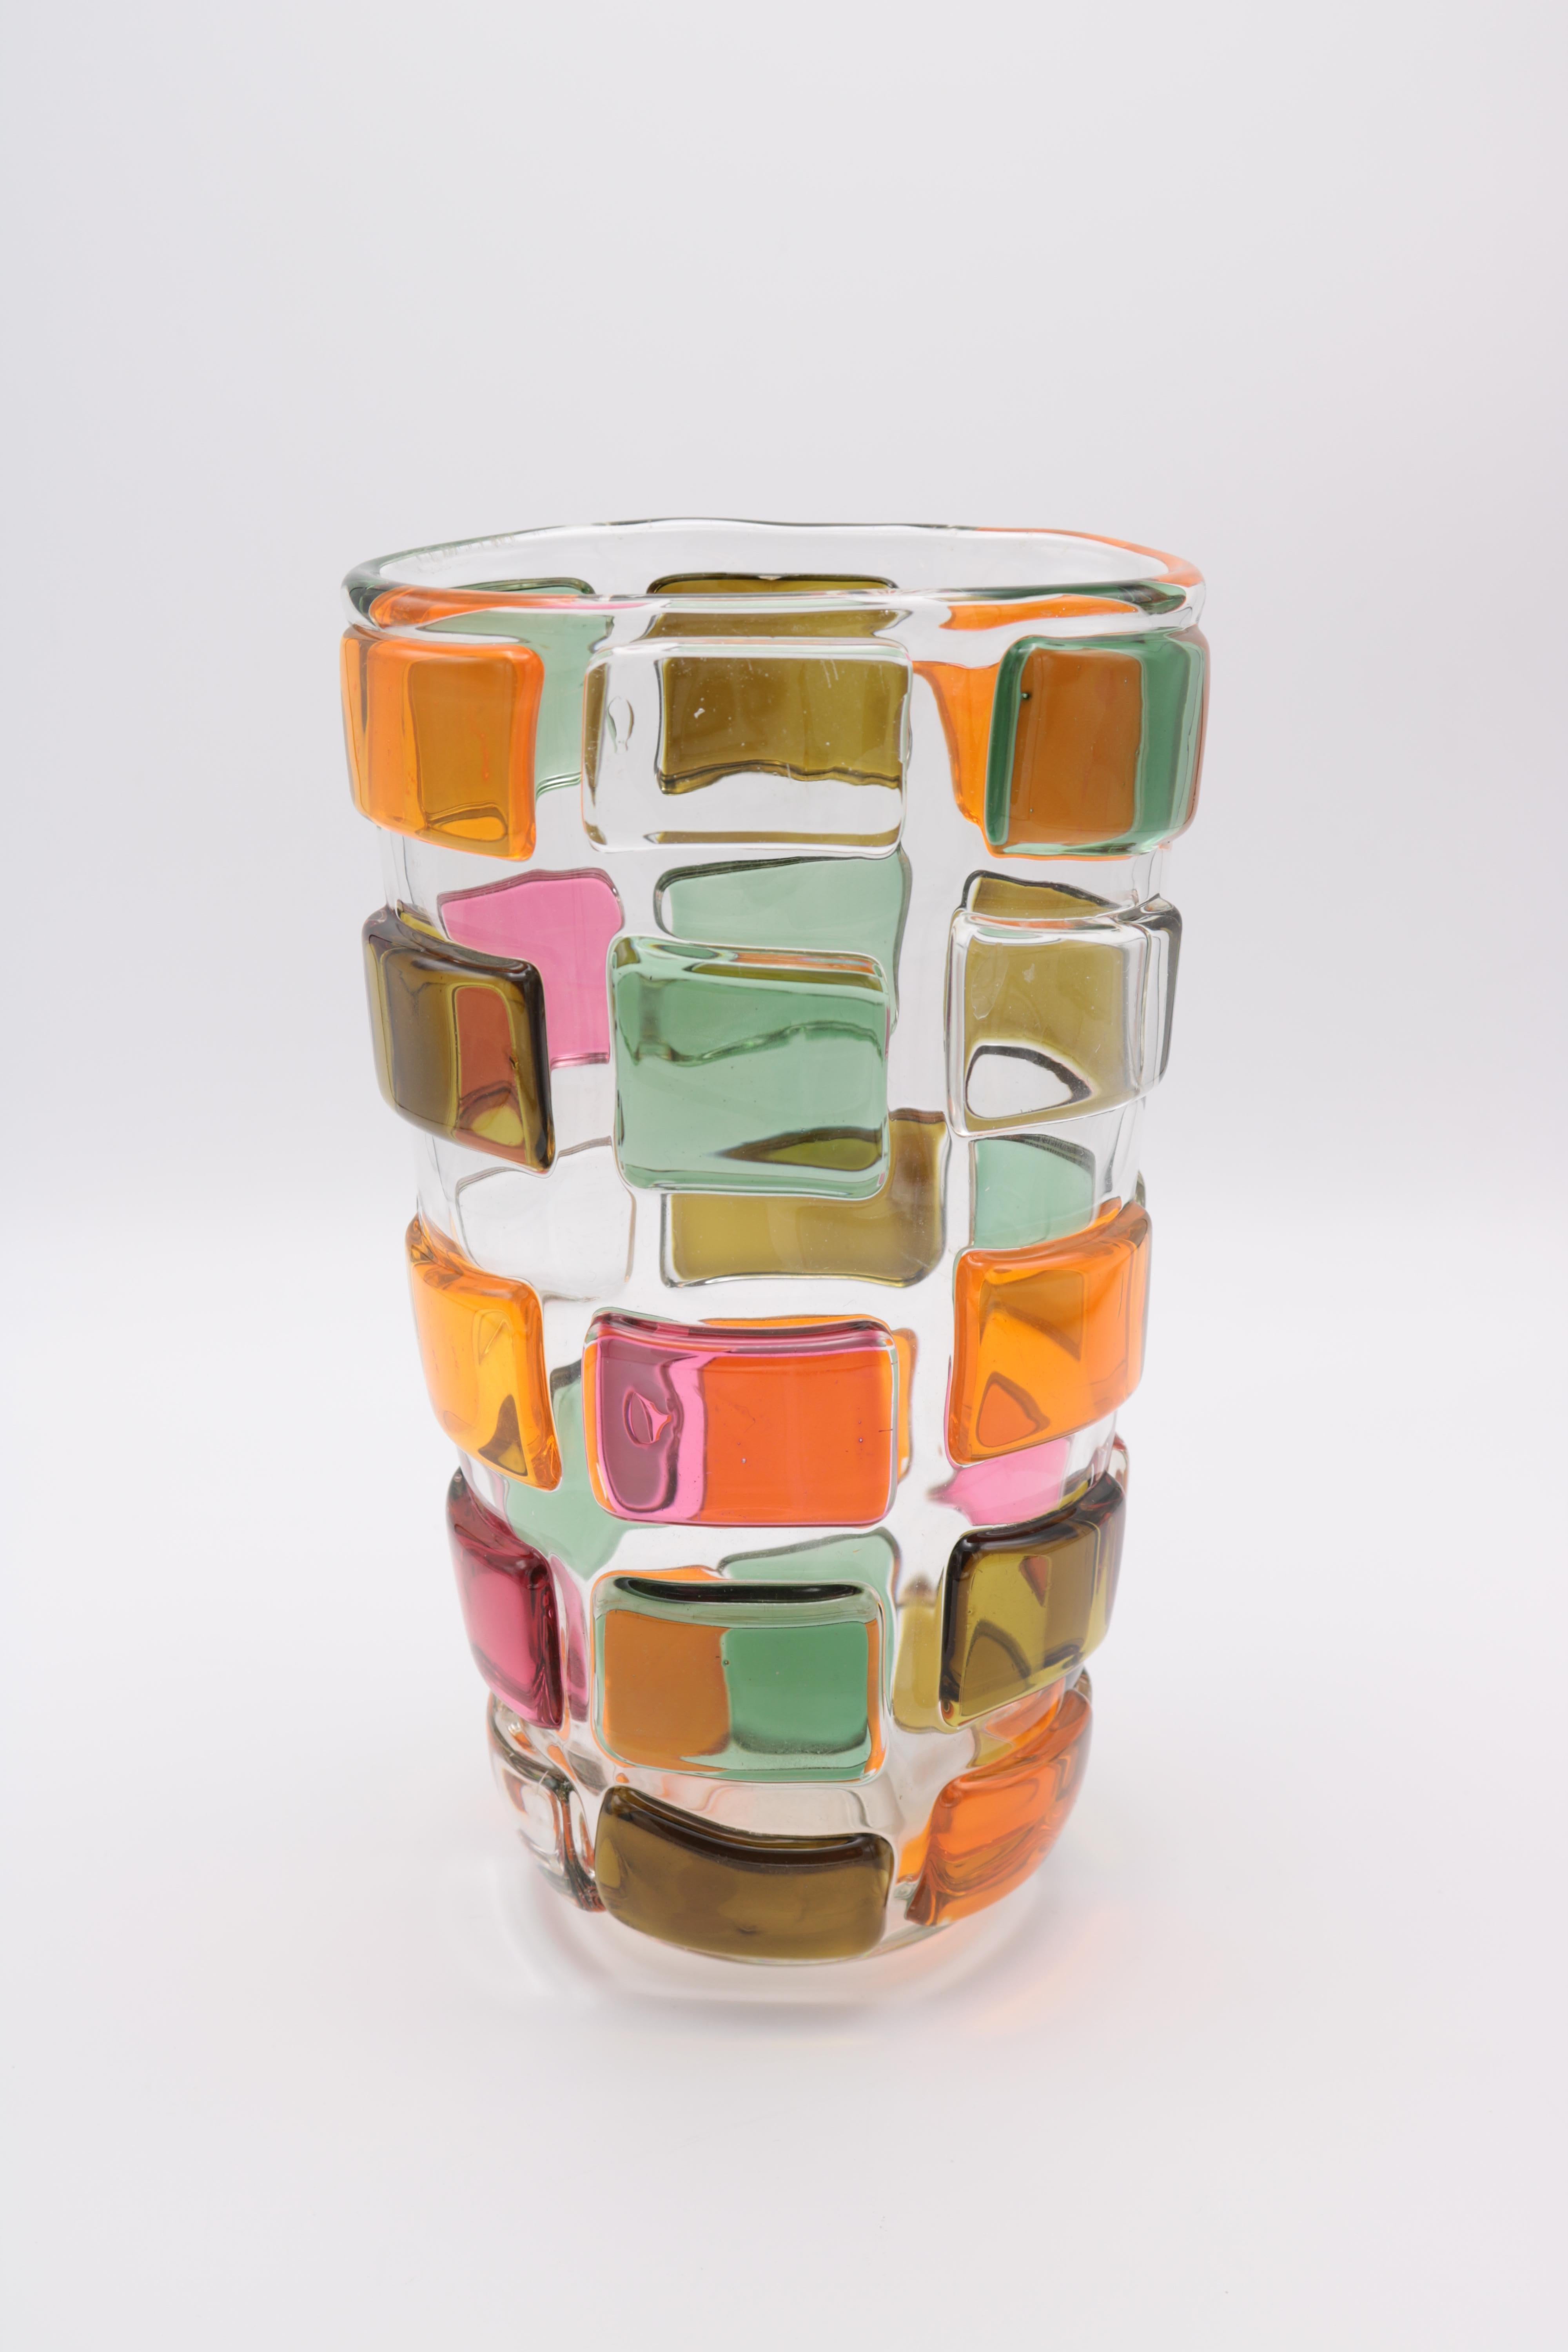 An art glass vase by Martin Potsch. 
Clear glass with muti-colored glass 
planels surrounding the main form.
 